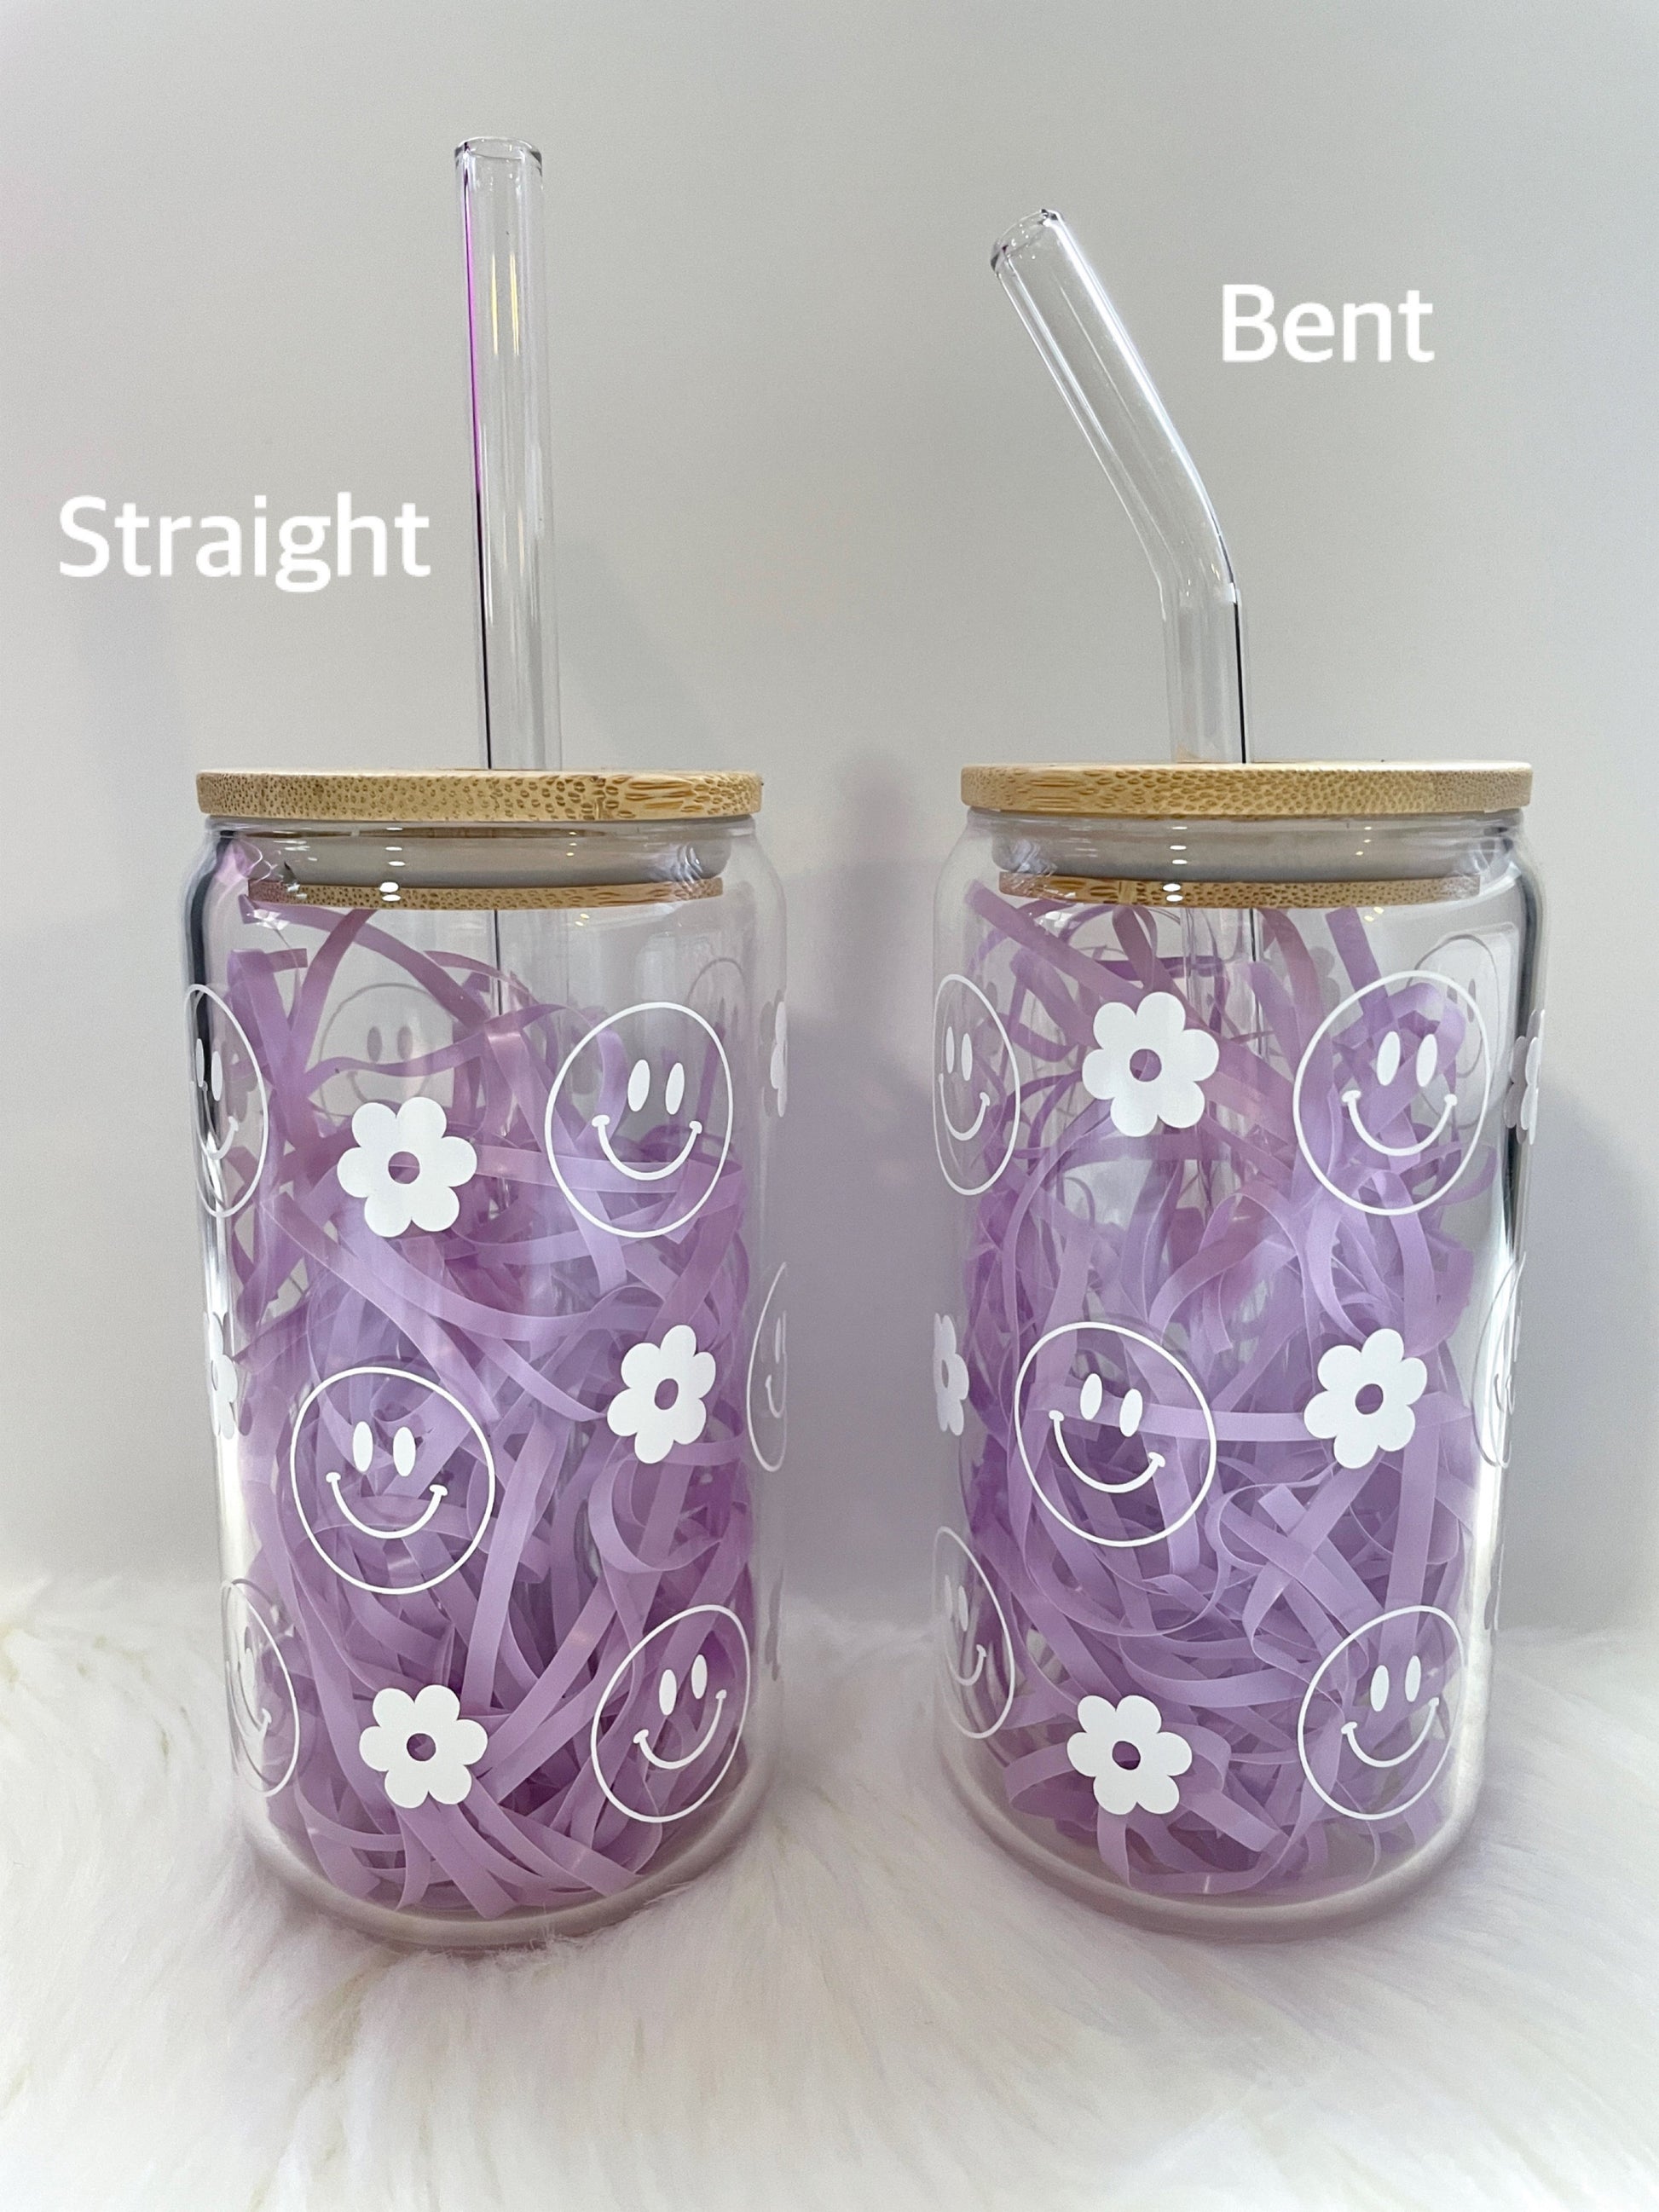 Glass Drinking Straws for Starbucks Vende Cups and Other Small Holed Lids 